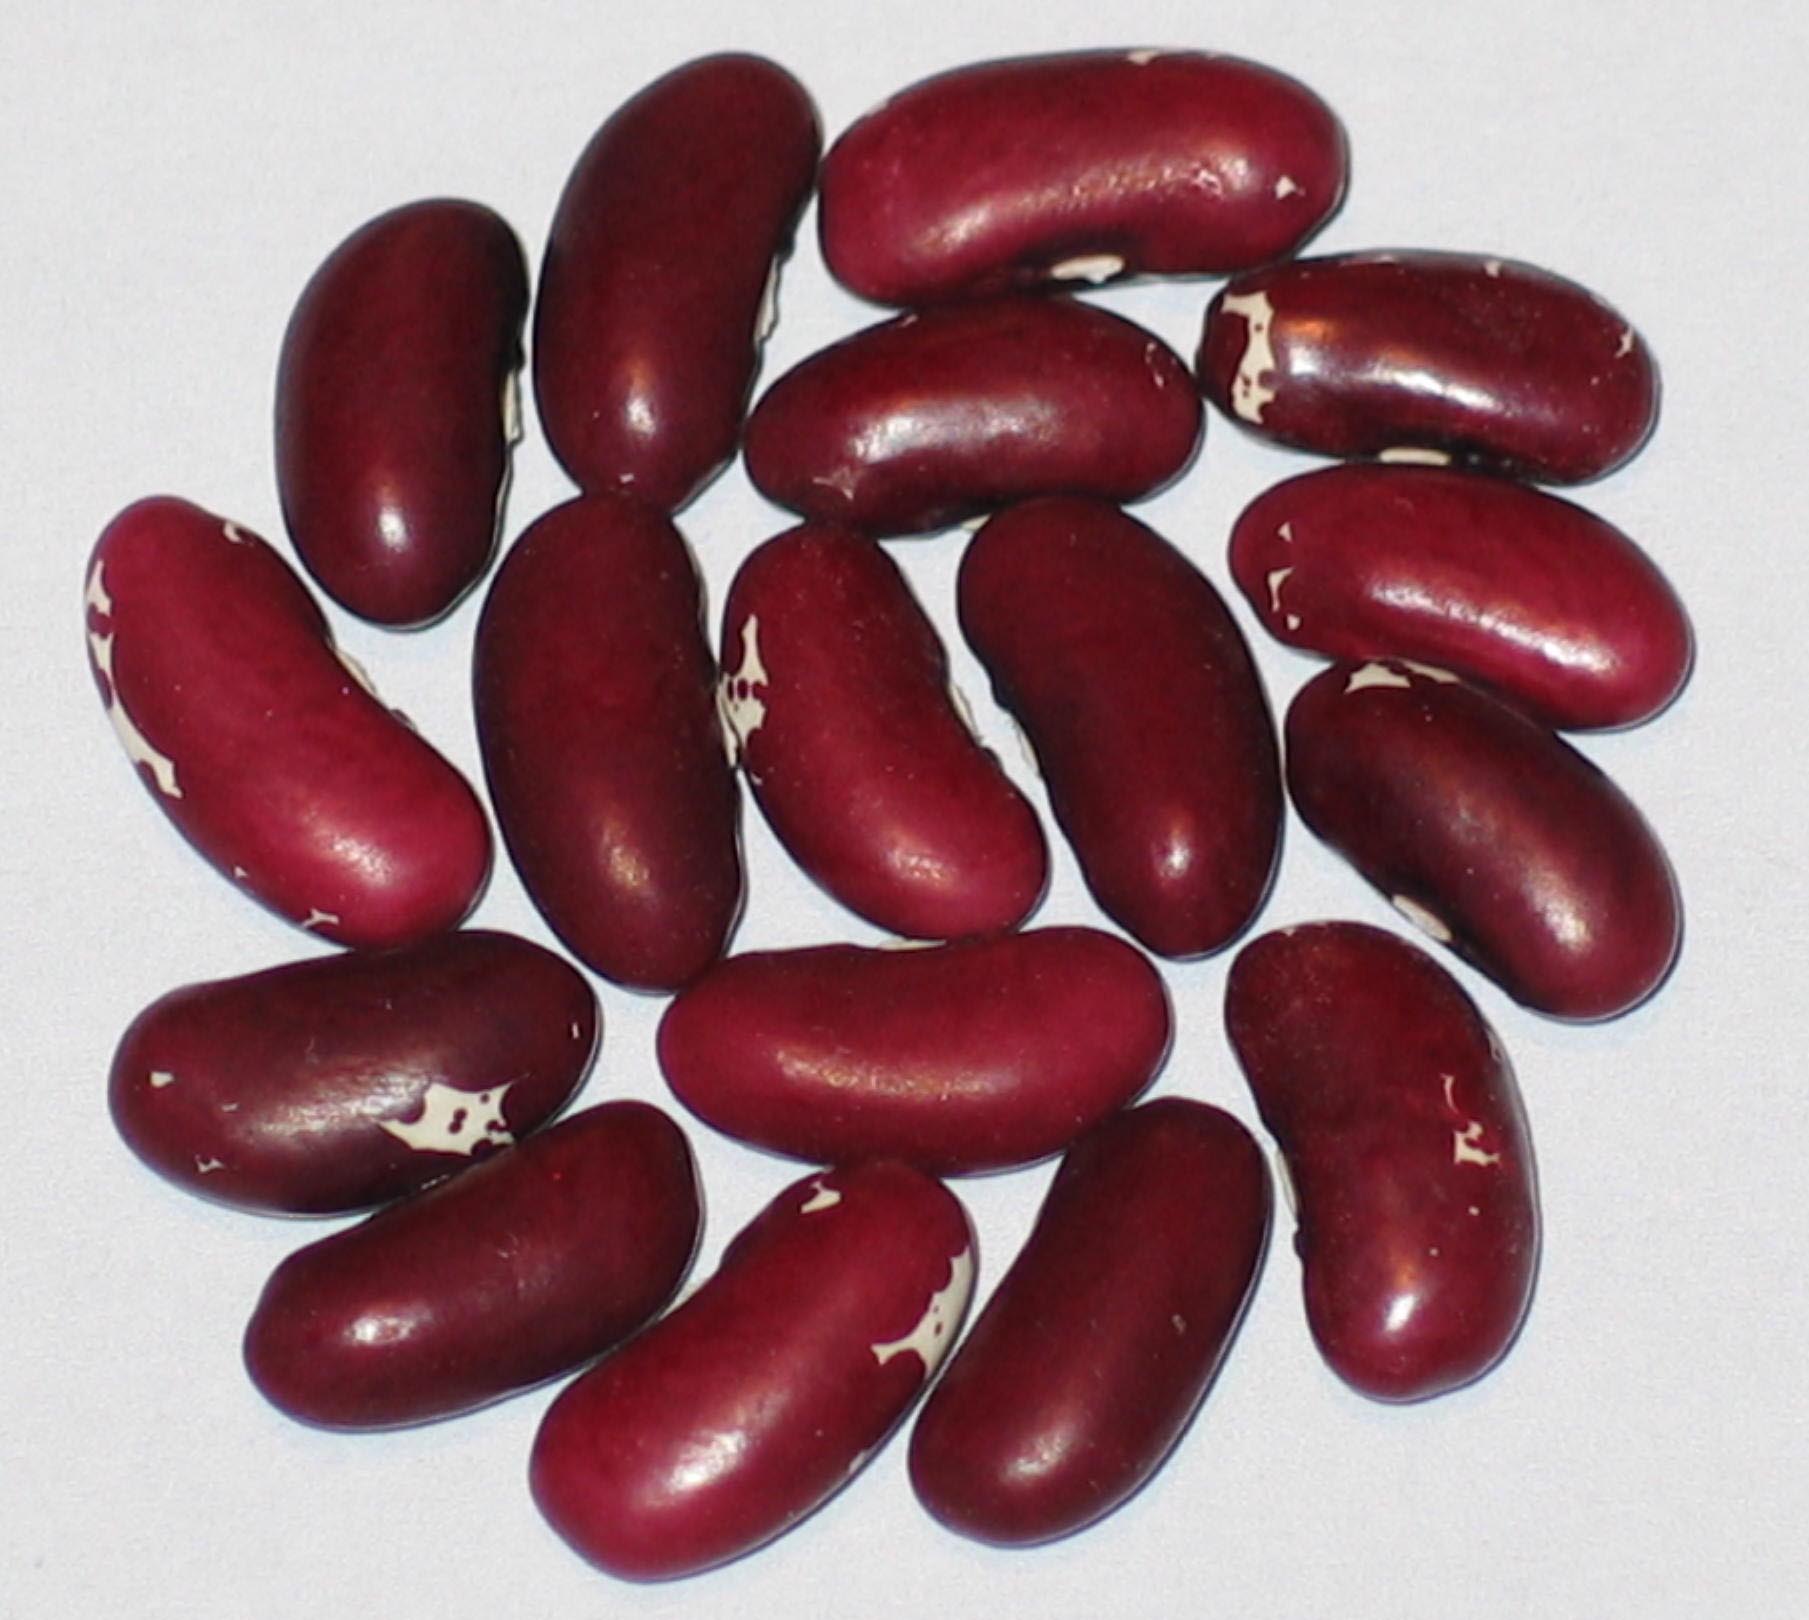 image of Early Vermillion beans